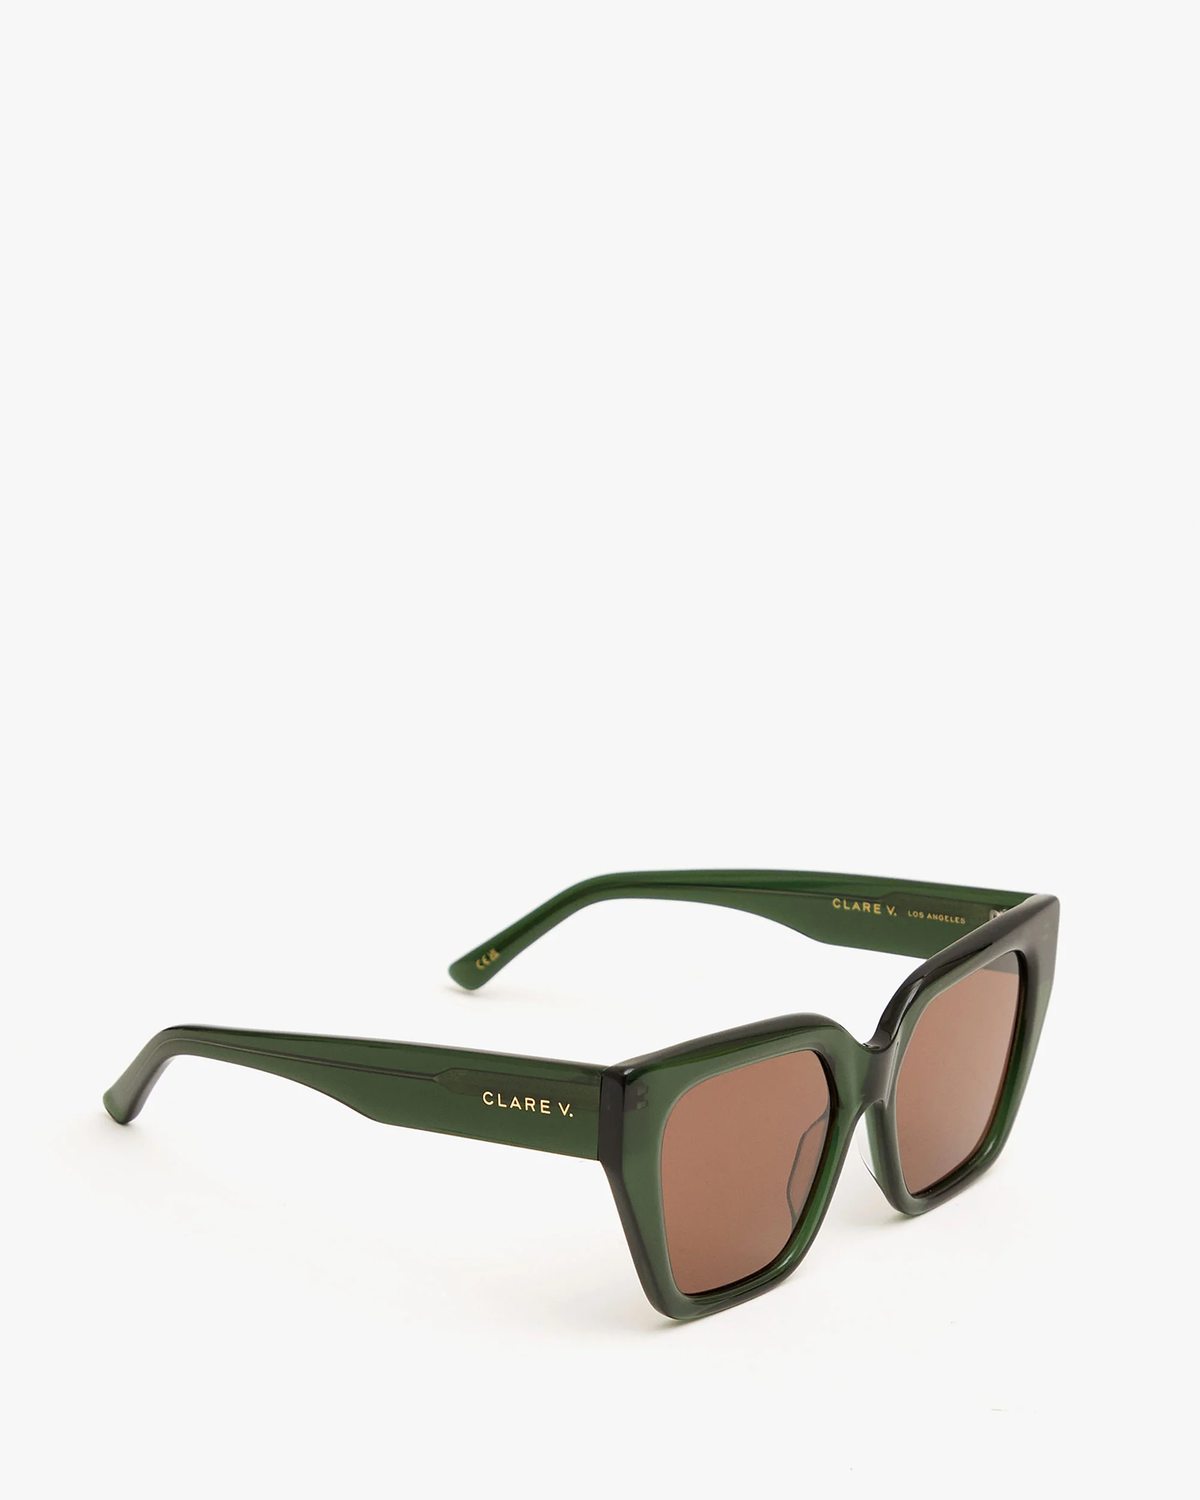 Heather Sunglasses in Loden